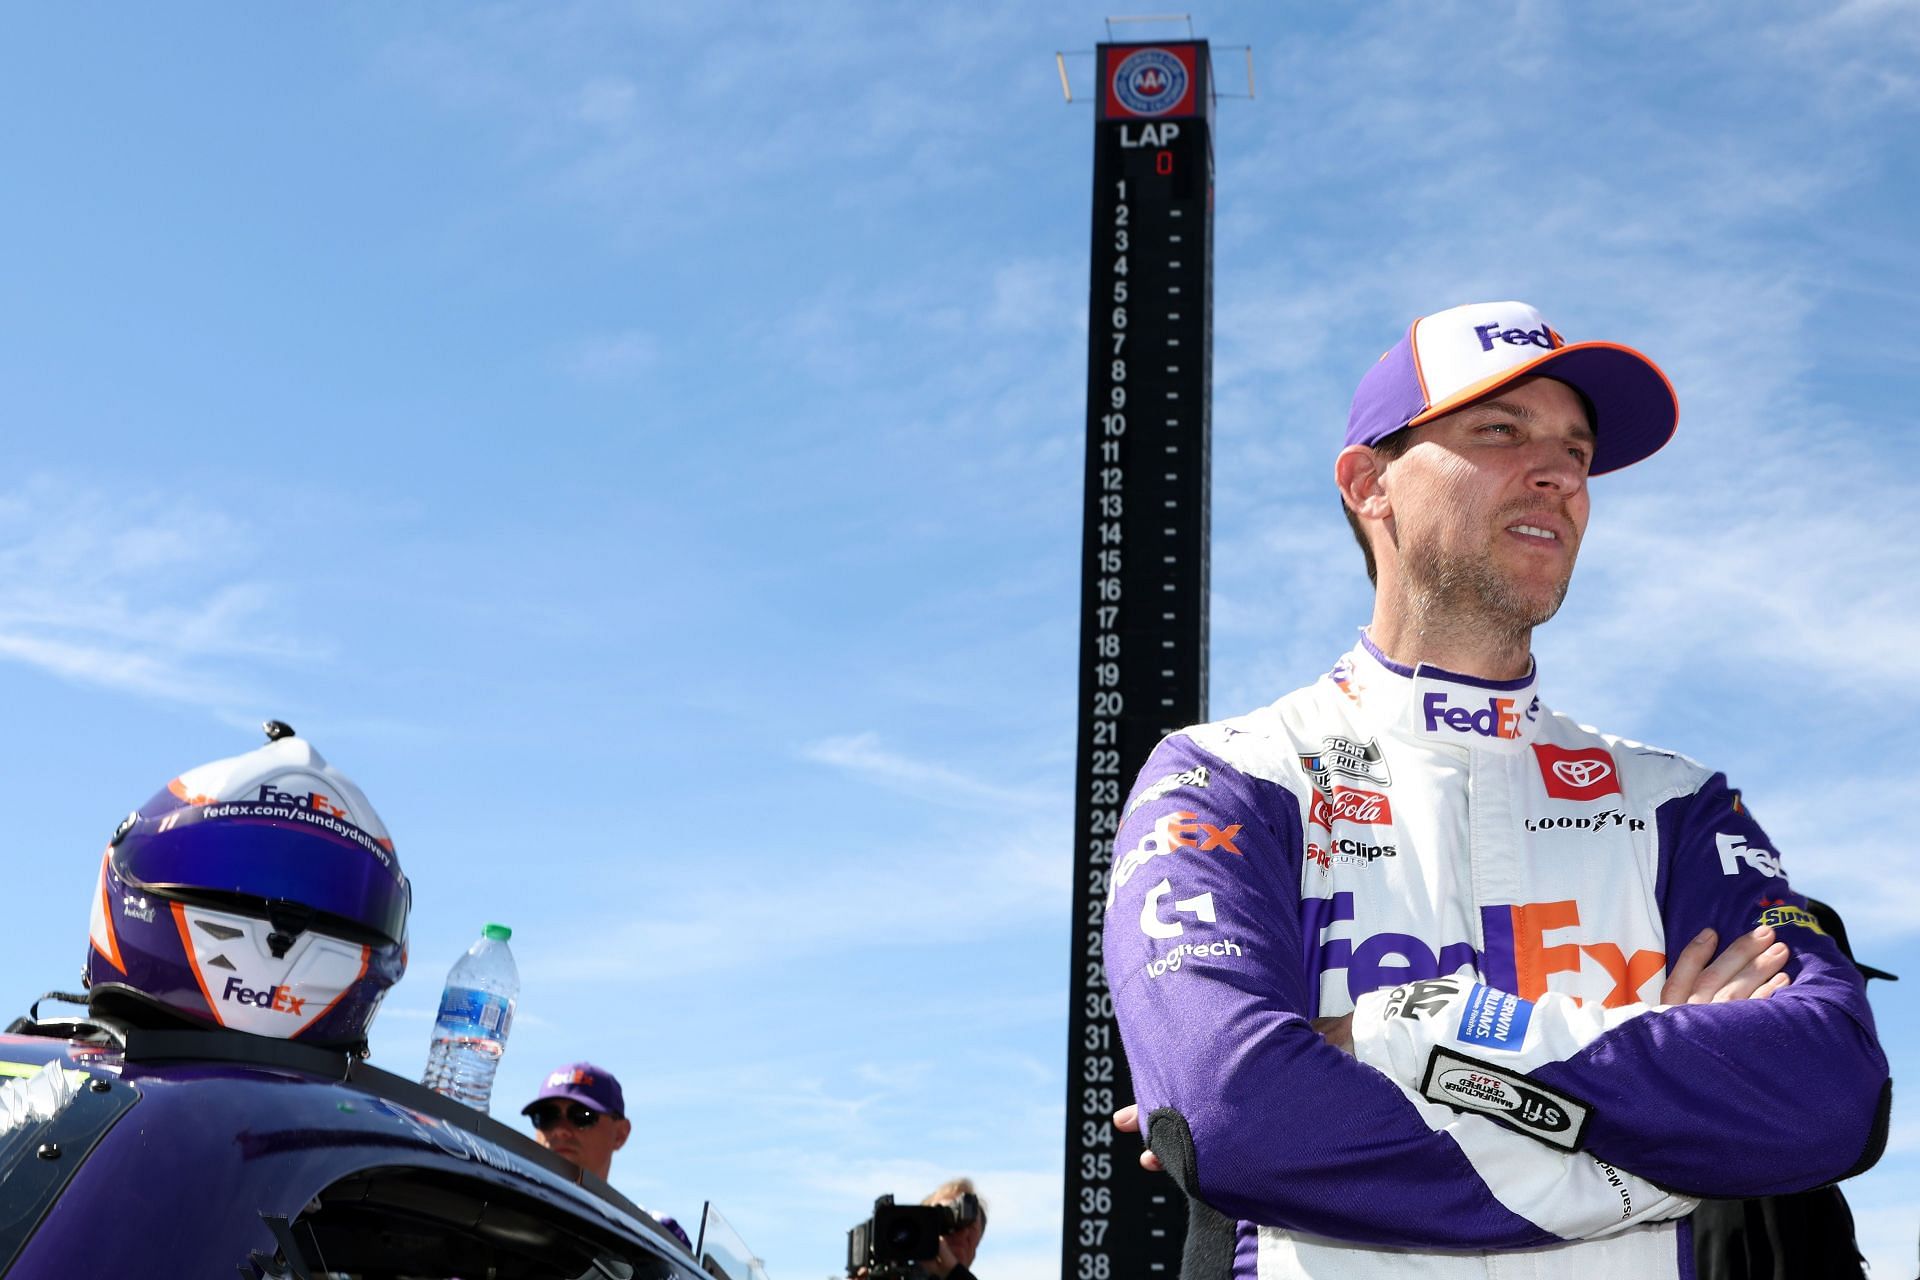 Denny Hamlin waits on the grid prior to the NASCAR Cup Series Wise Power 400 at Auto Club Speedway.